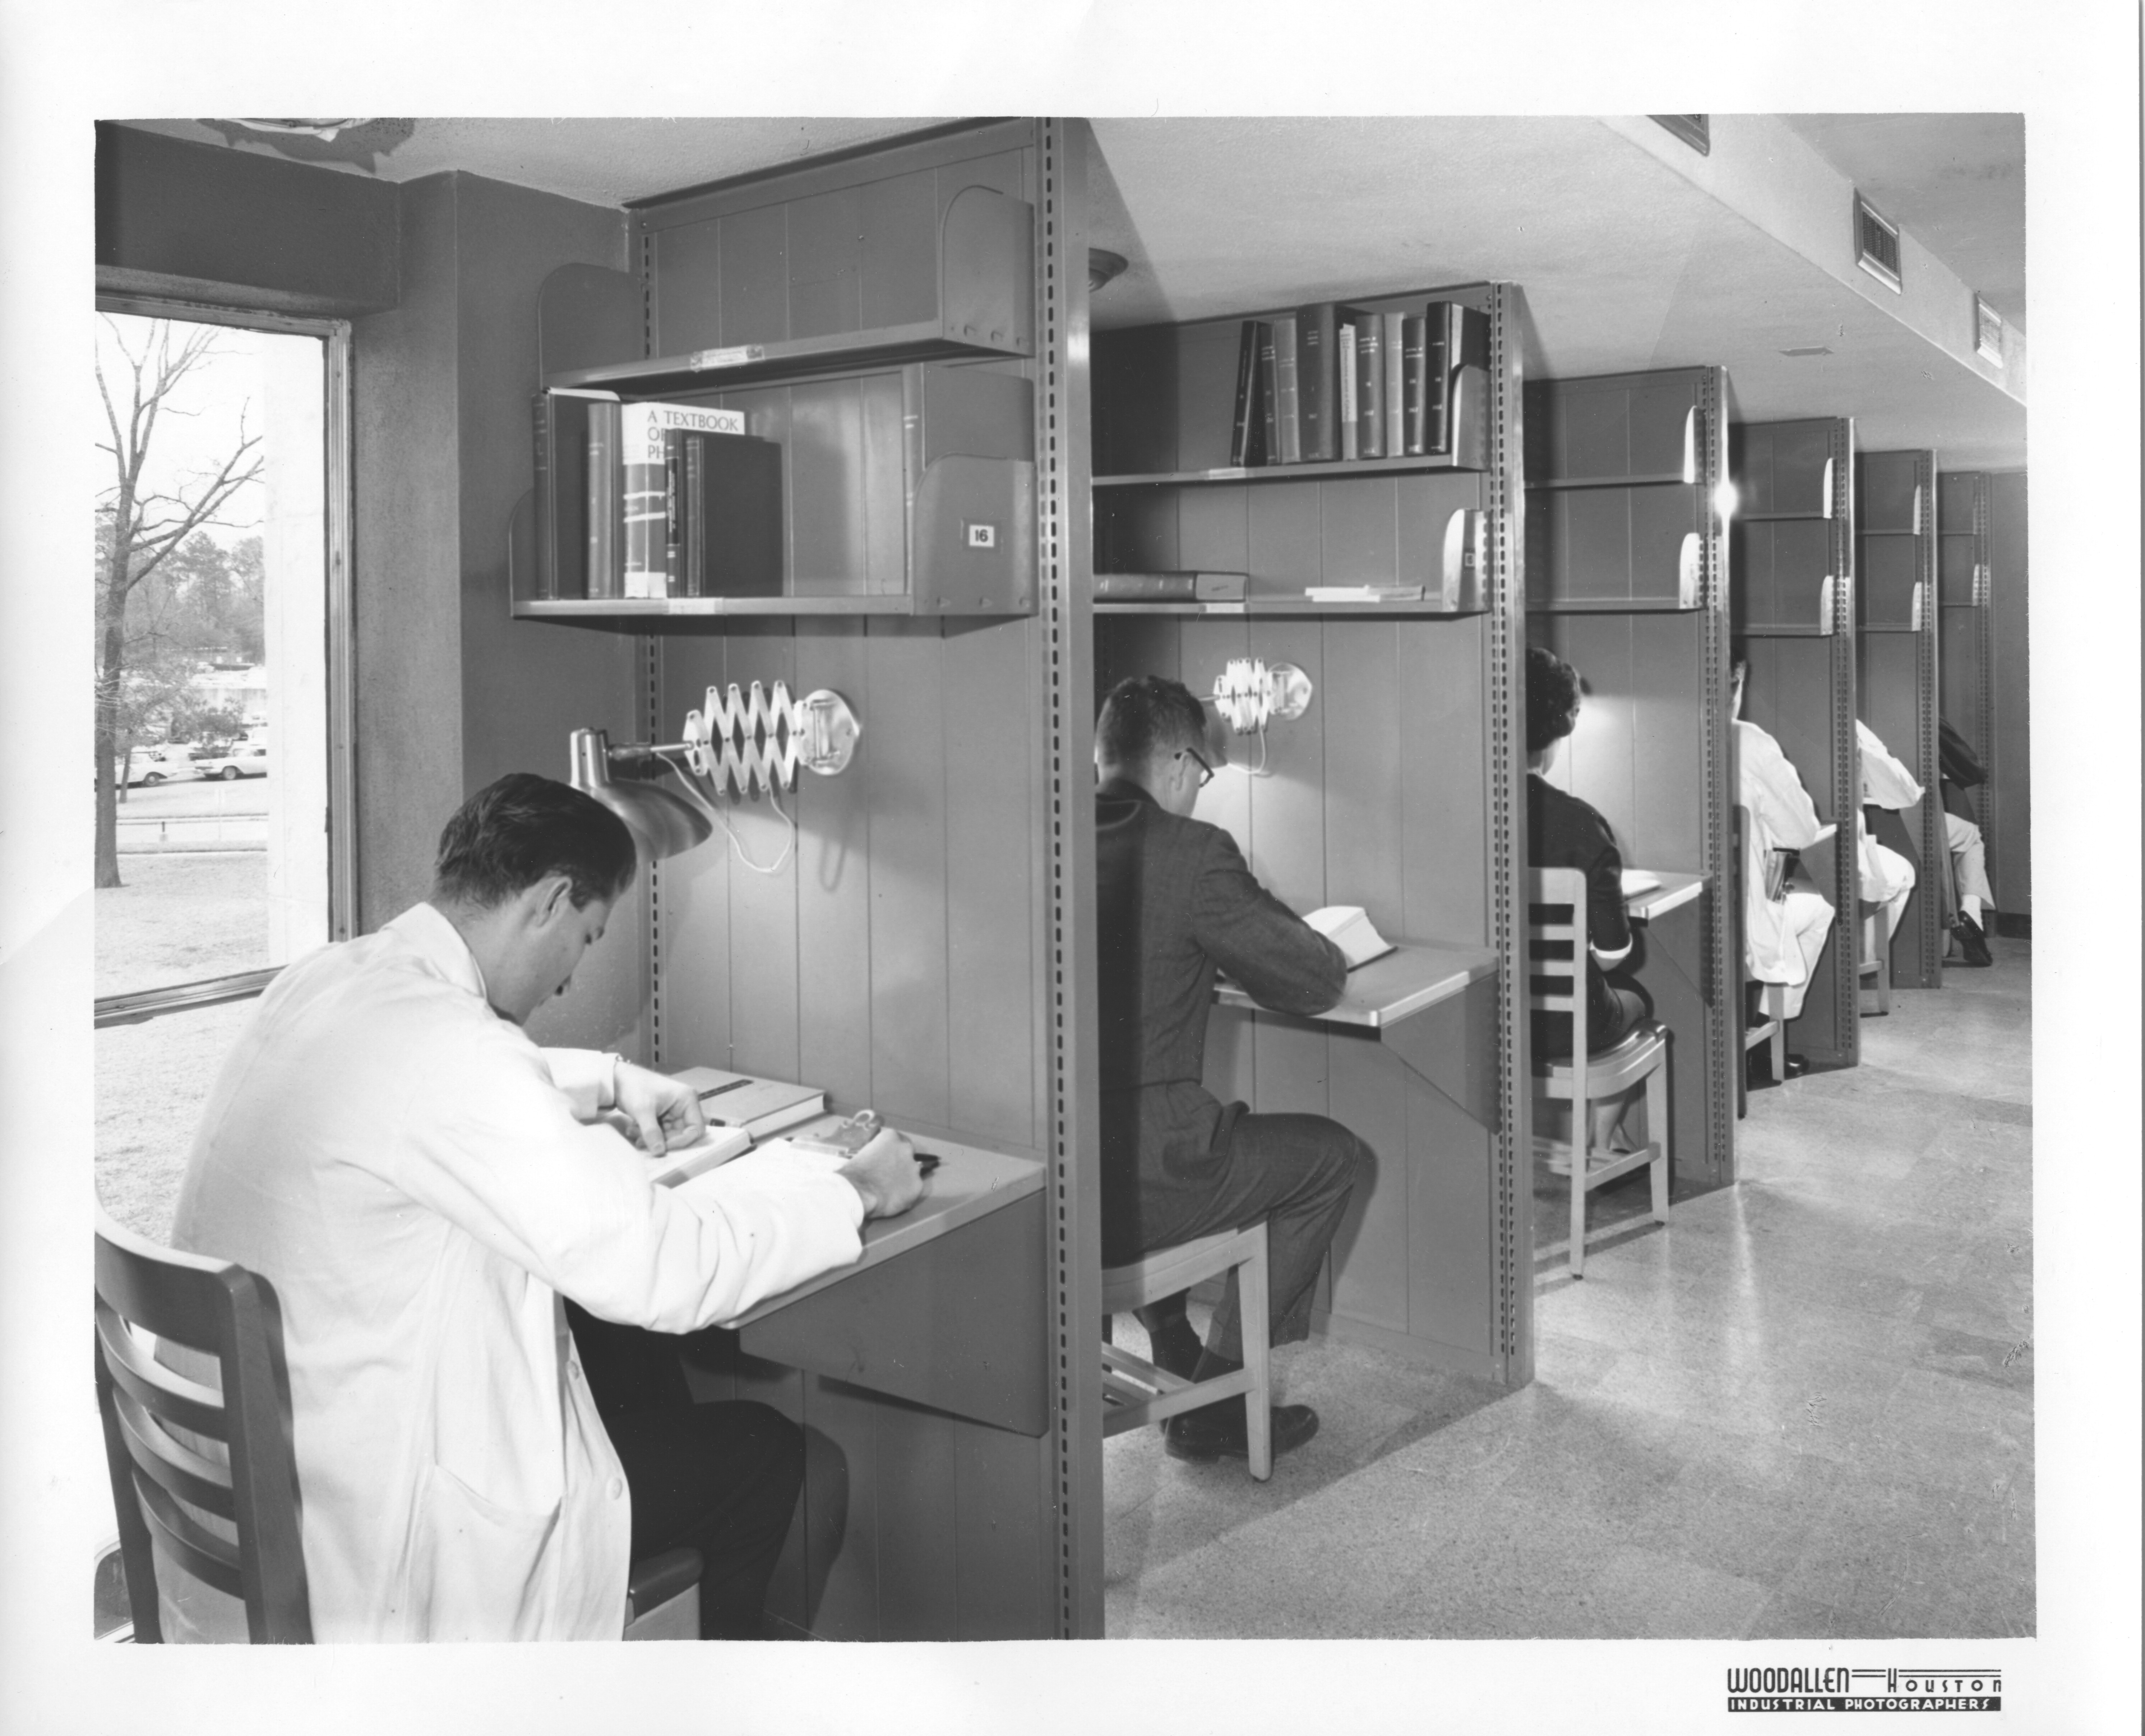 Study Carrells, 1961. Medical students use individual study spaces in the library. IC001 HAM-TMC Library records (OV 100), IC098 HAM-TMC Library Historical Photograph Collection (P-3359, OV 93), McGovern Historical Center